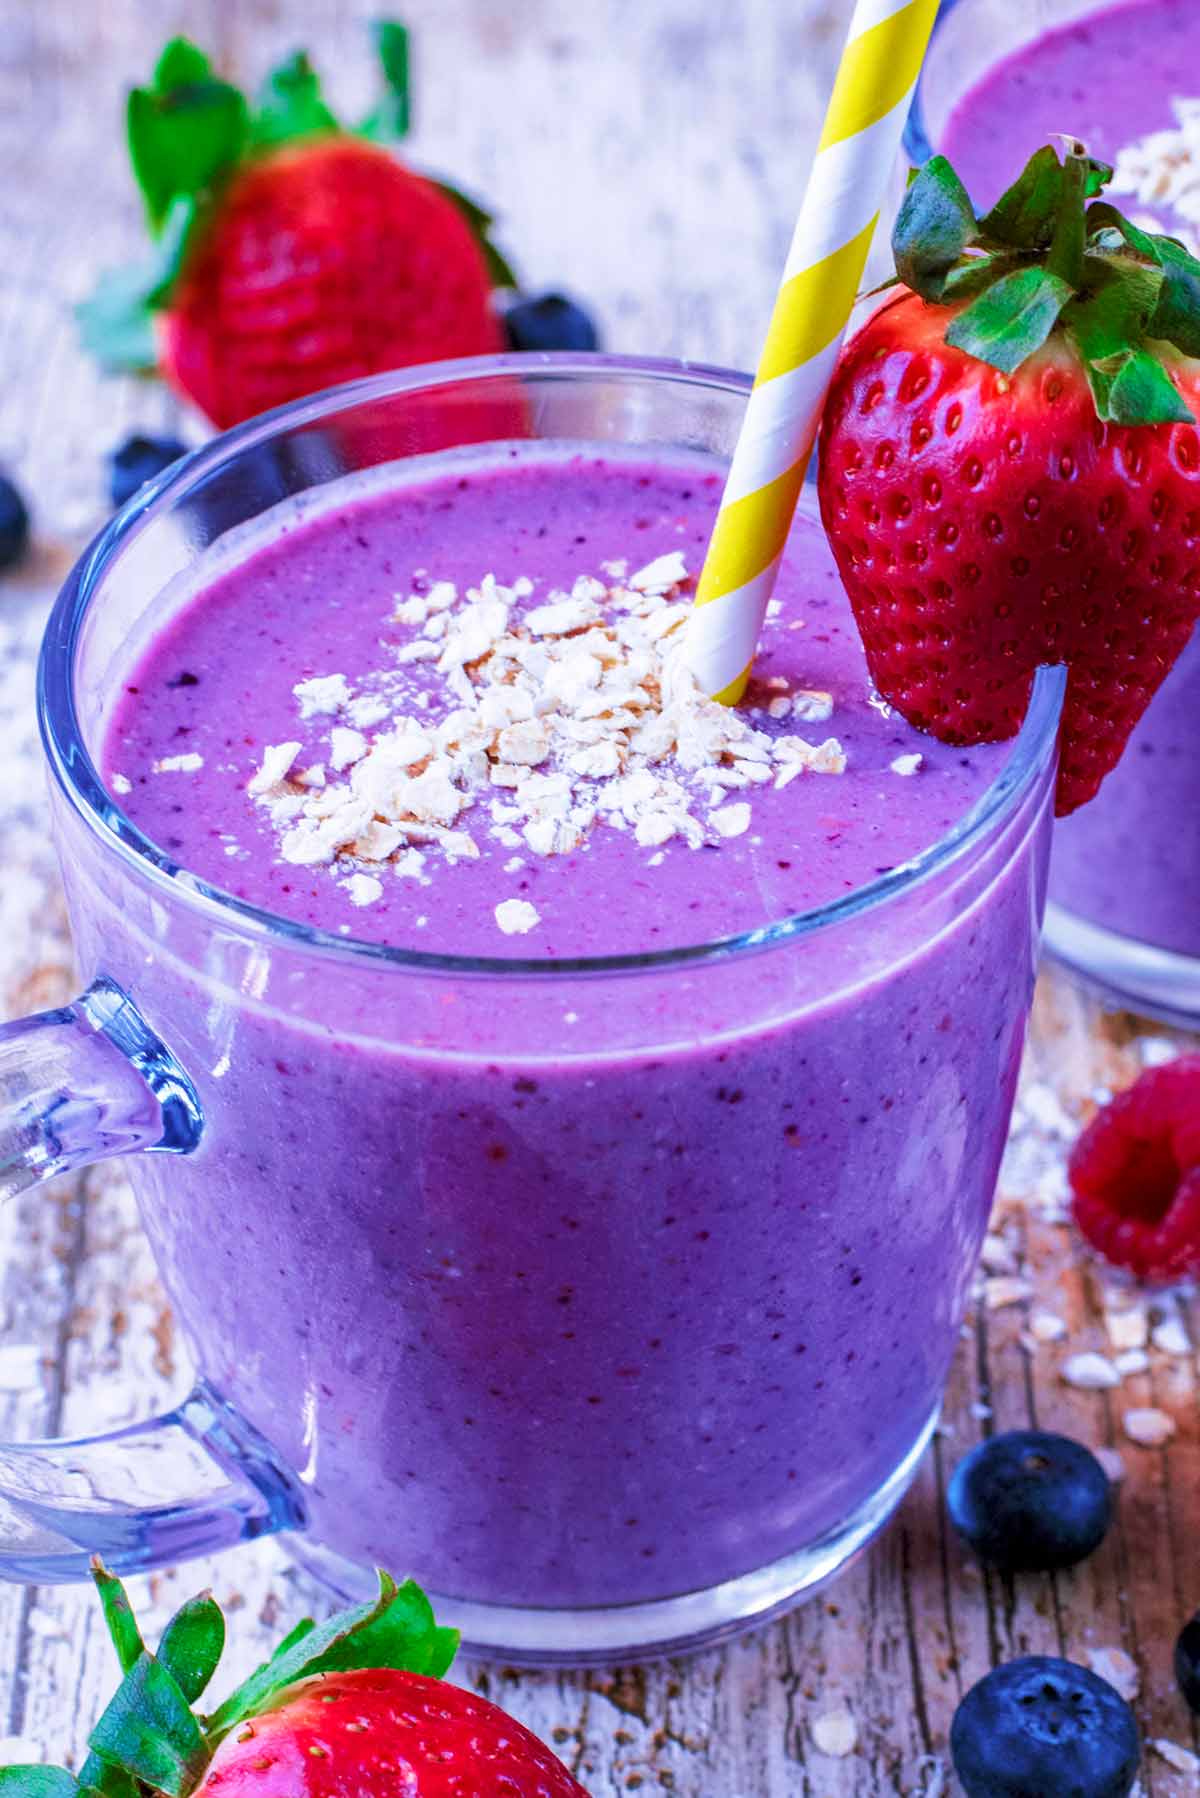 A glass containing a berry smoothie with oats on top and a strawberry on the rim.